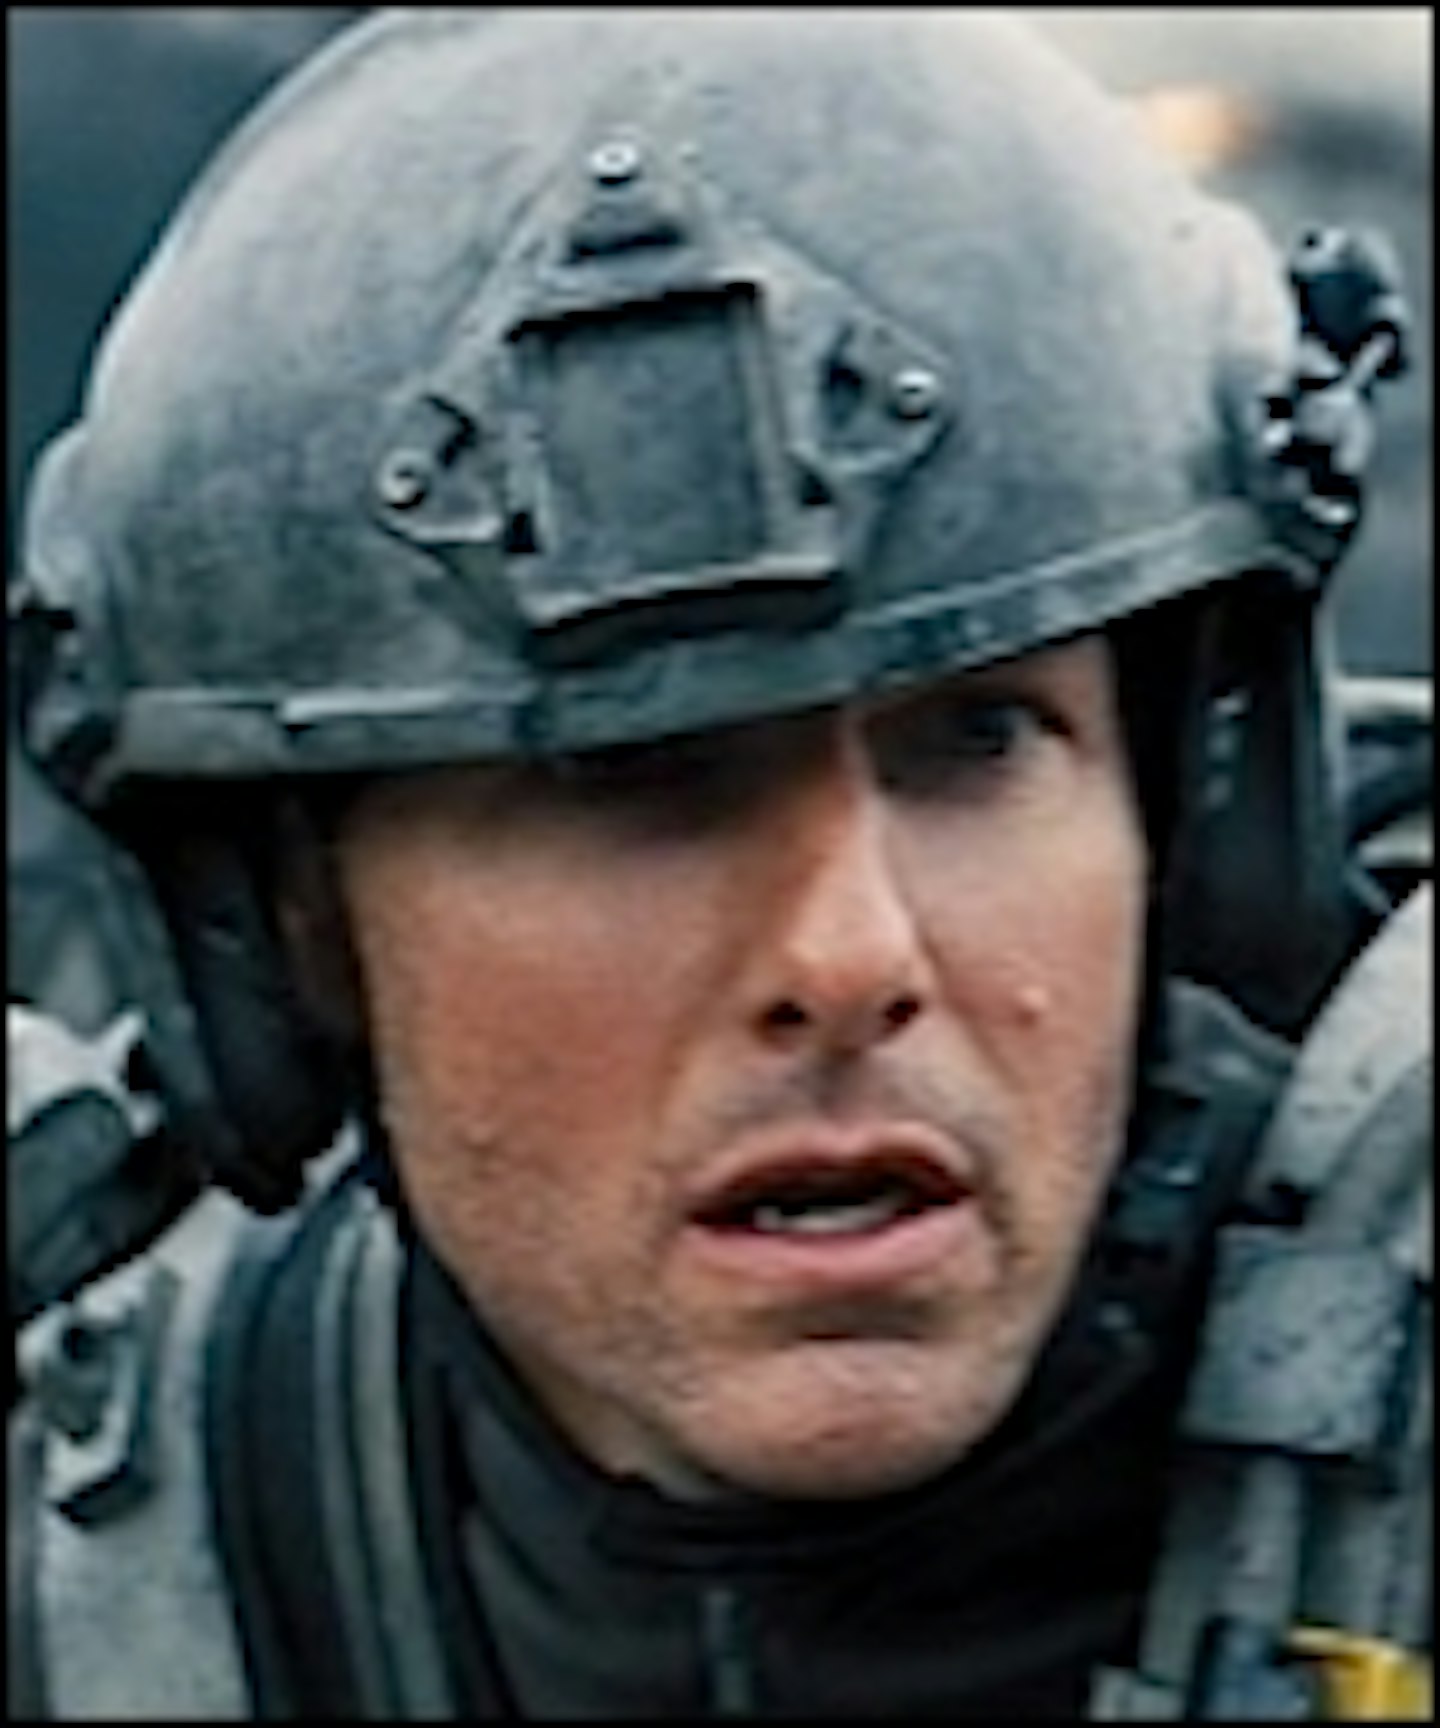 New Edge Of Tomorrow Images Online